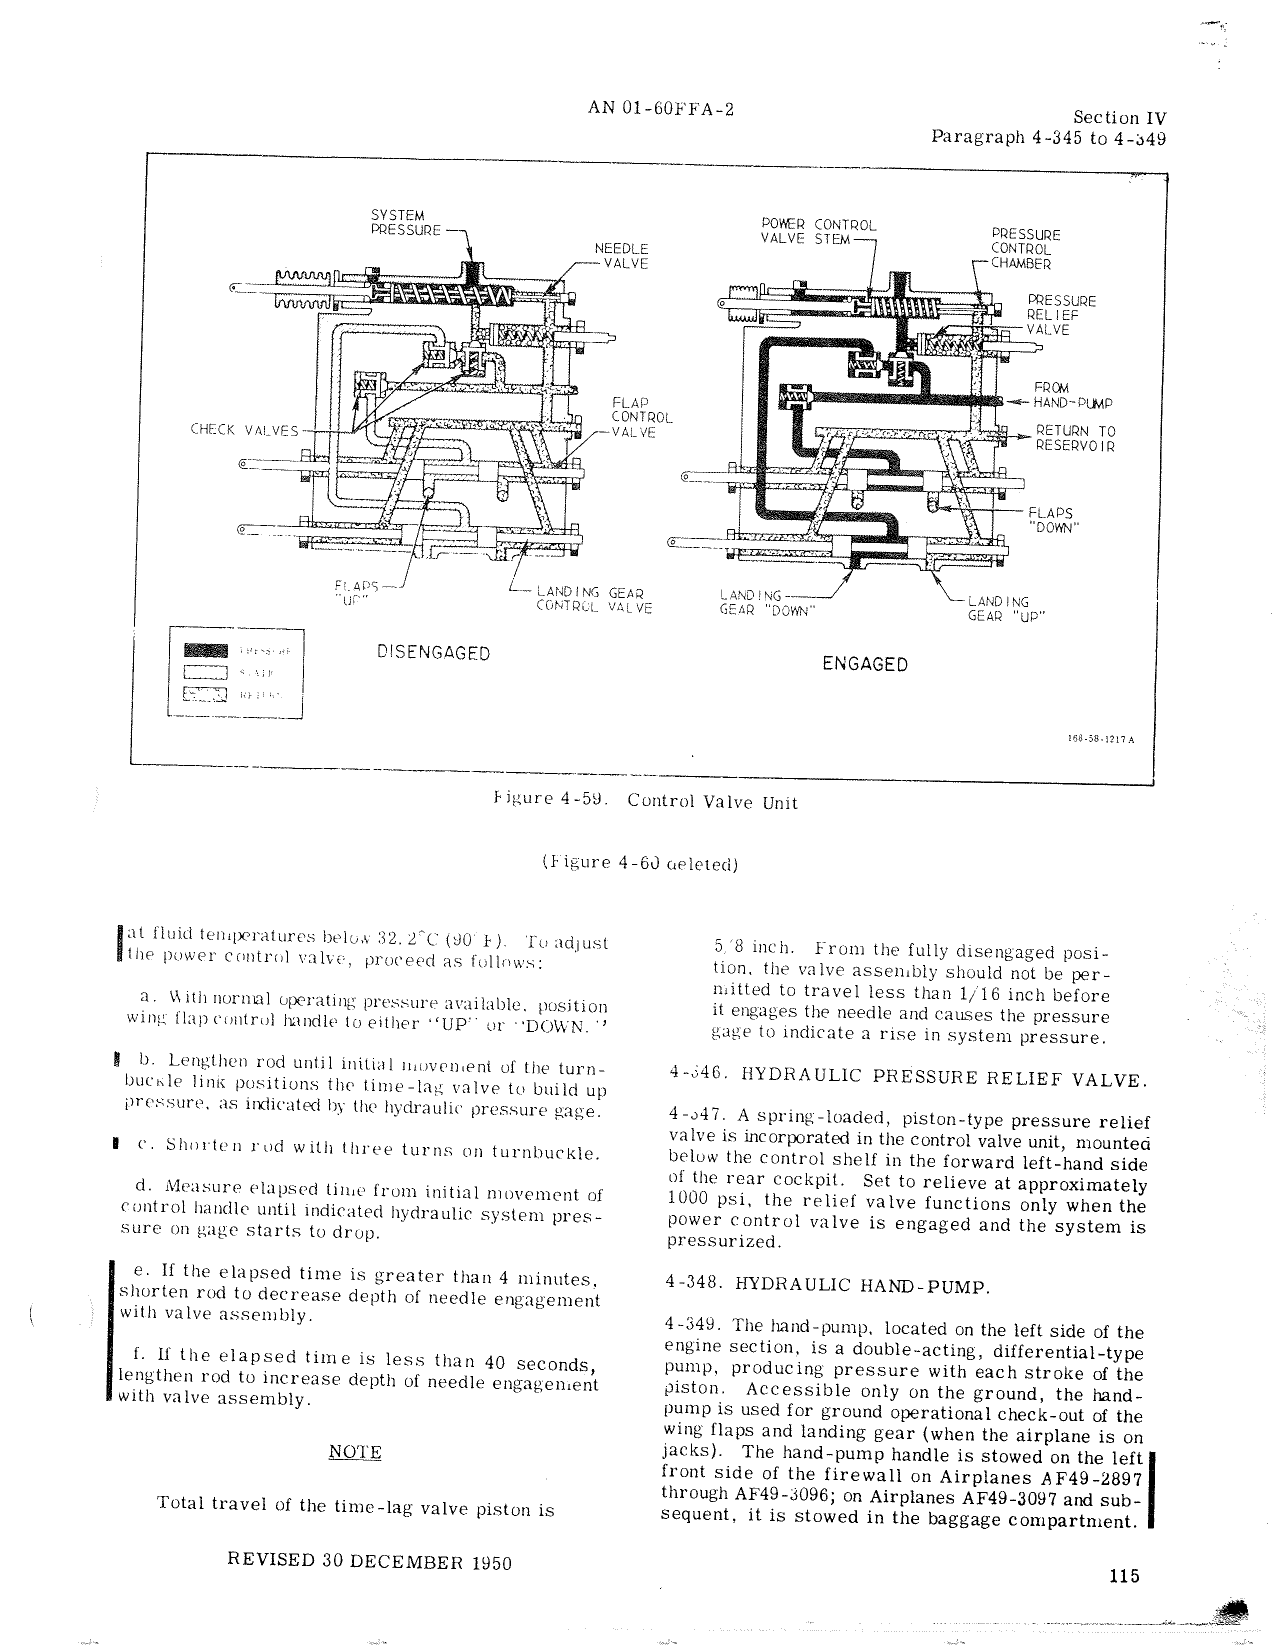 Sample page 161 from AirCorps Library document: Maintenance Manual - T-6G & LT-6G